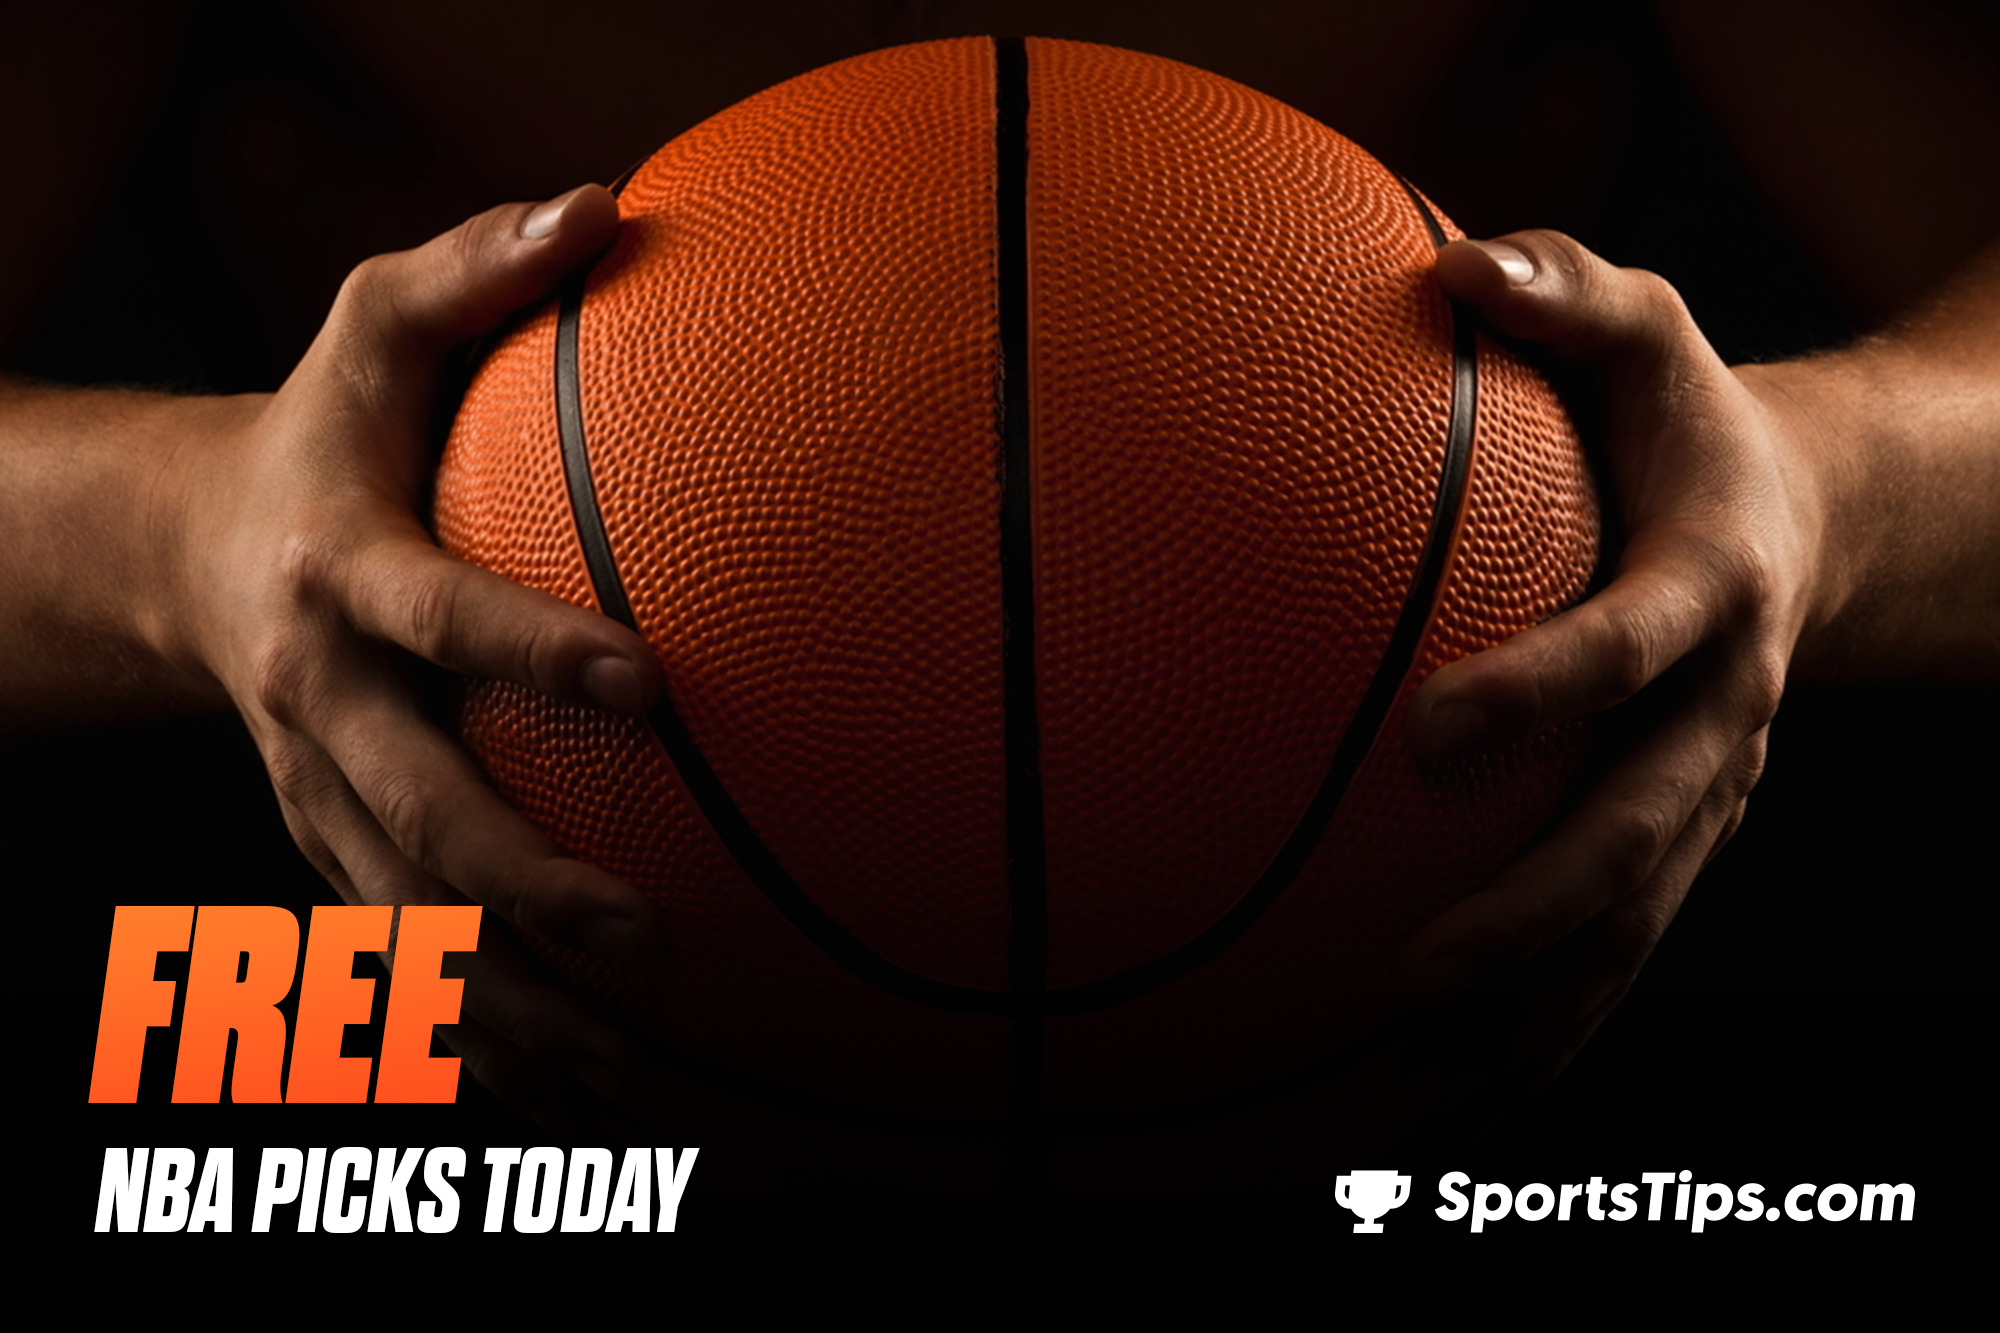 Free NBA Picks and Parlays For Friday, October 21st, 2022